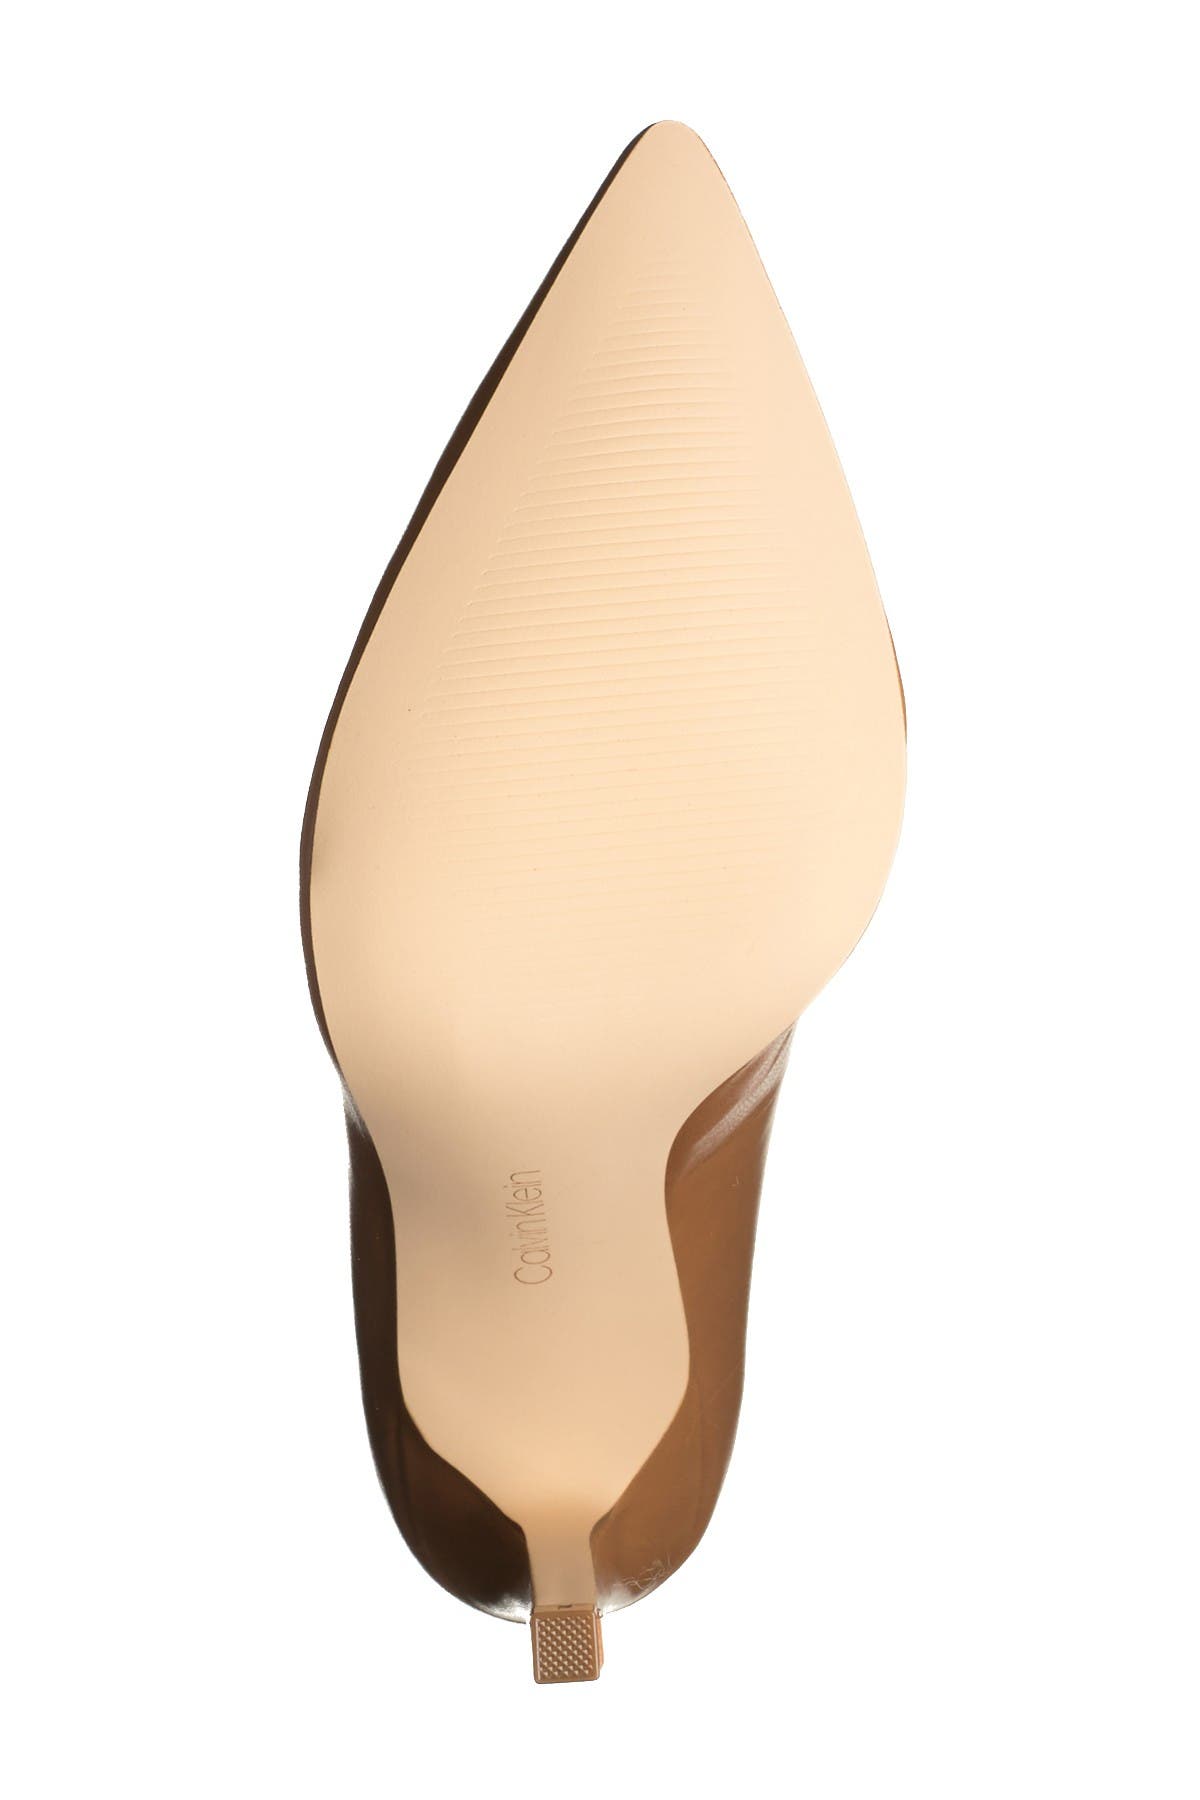 Brady Leather Pointed Toe Pump 